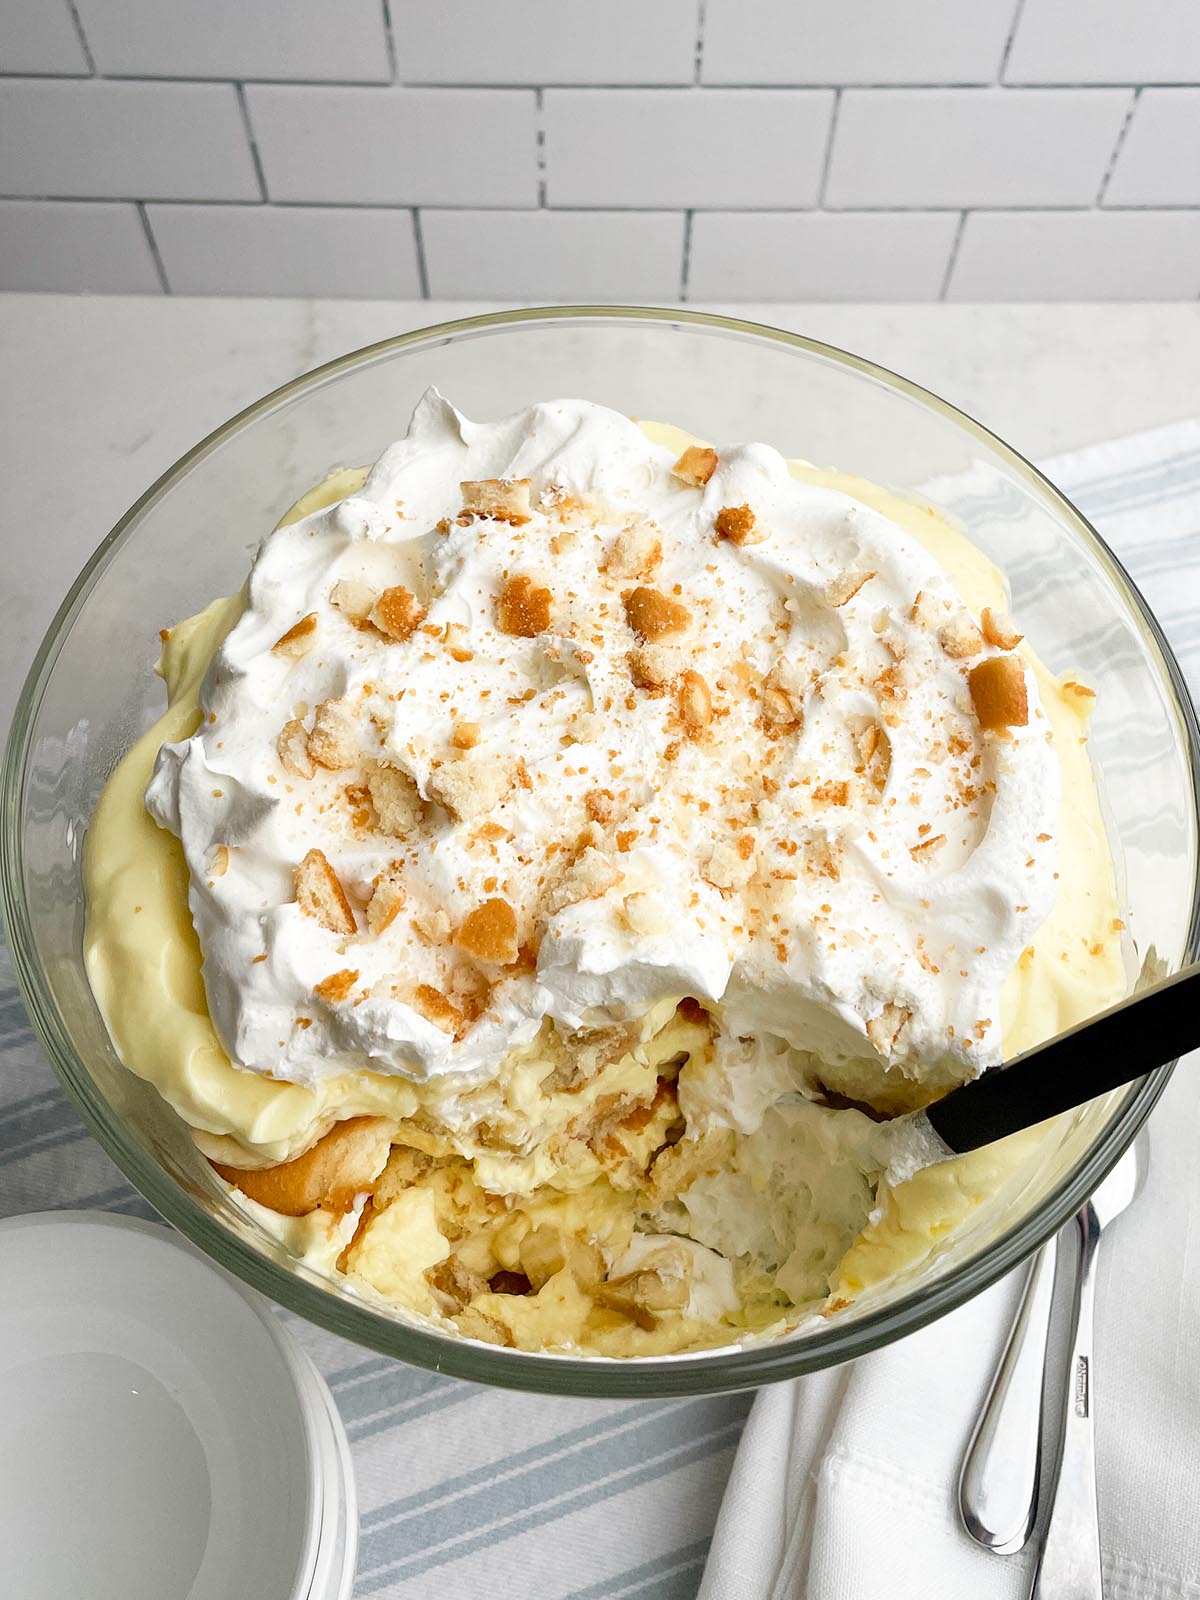 top view of banana pudding with nilla wafer crumbles on top.